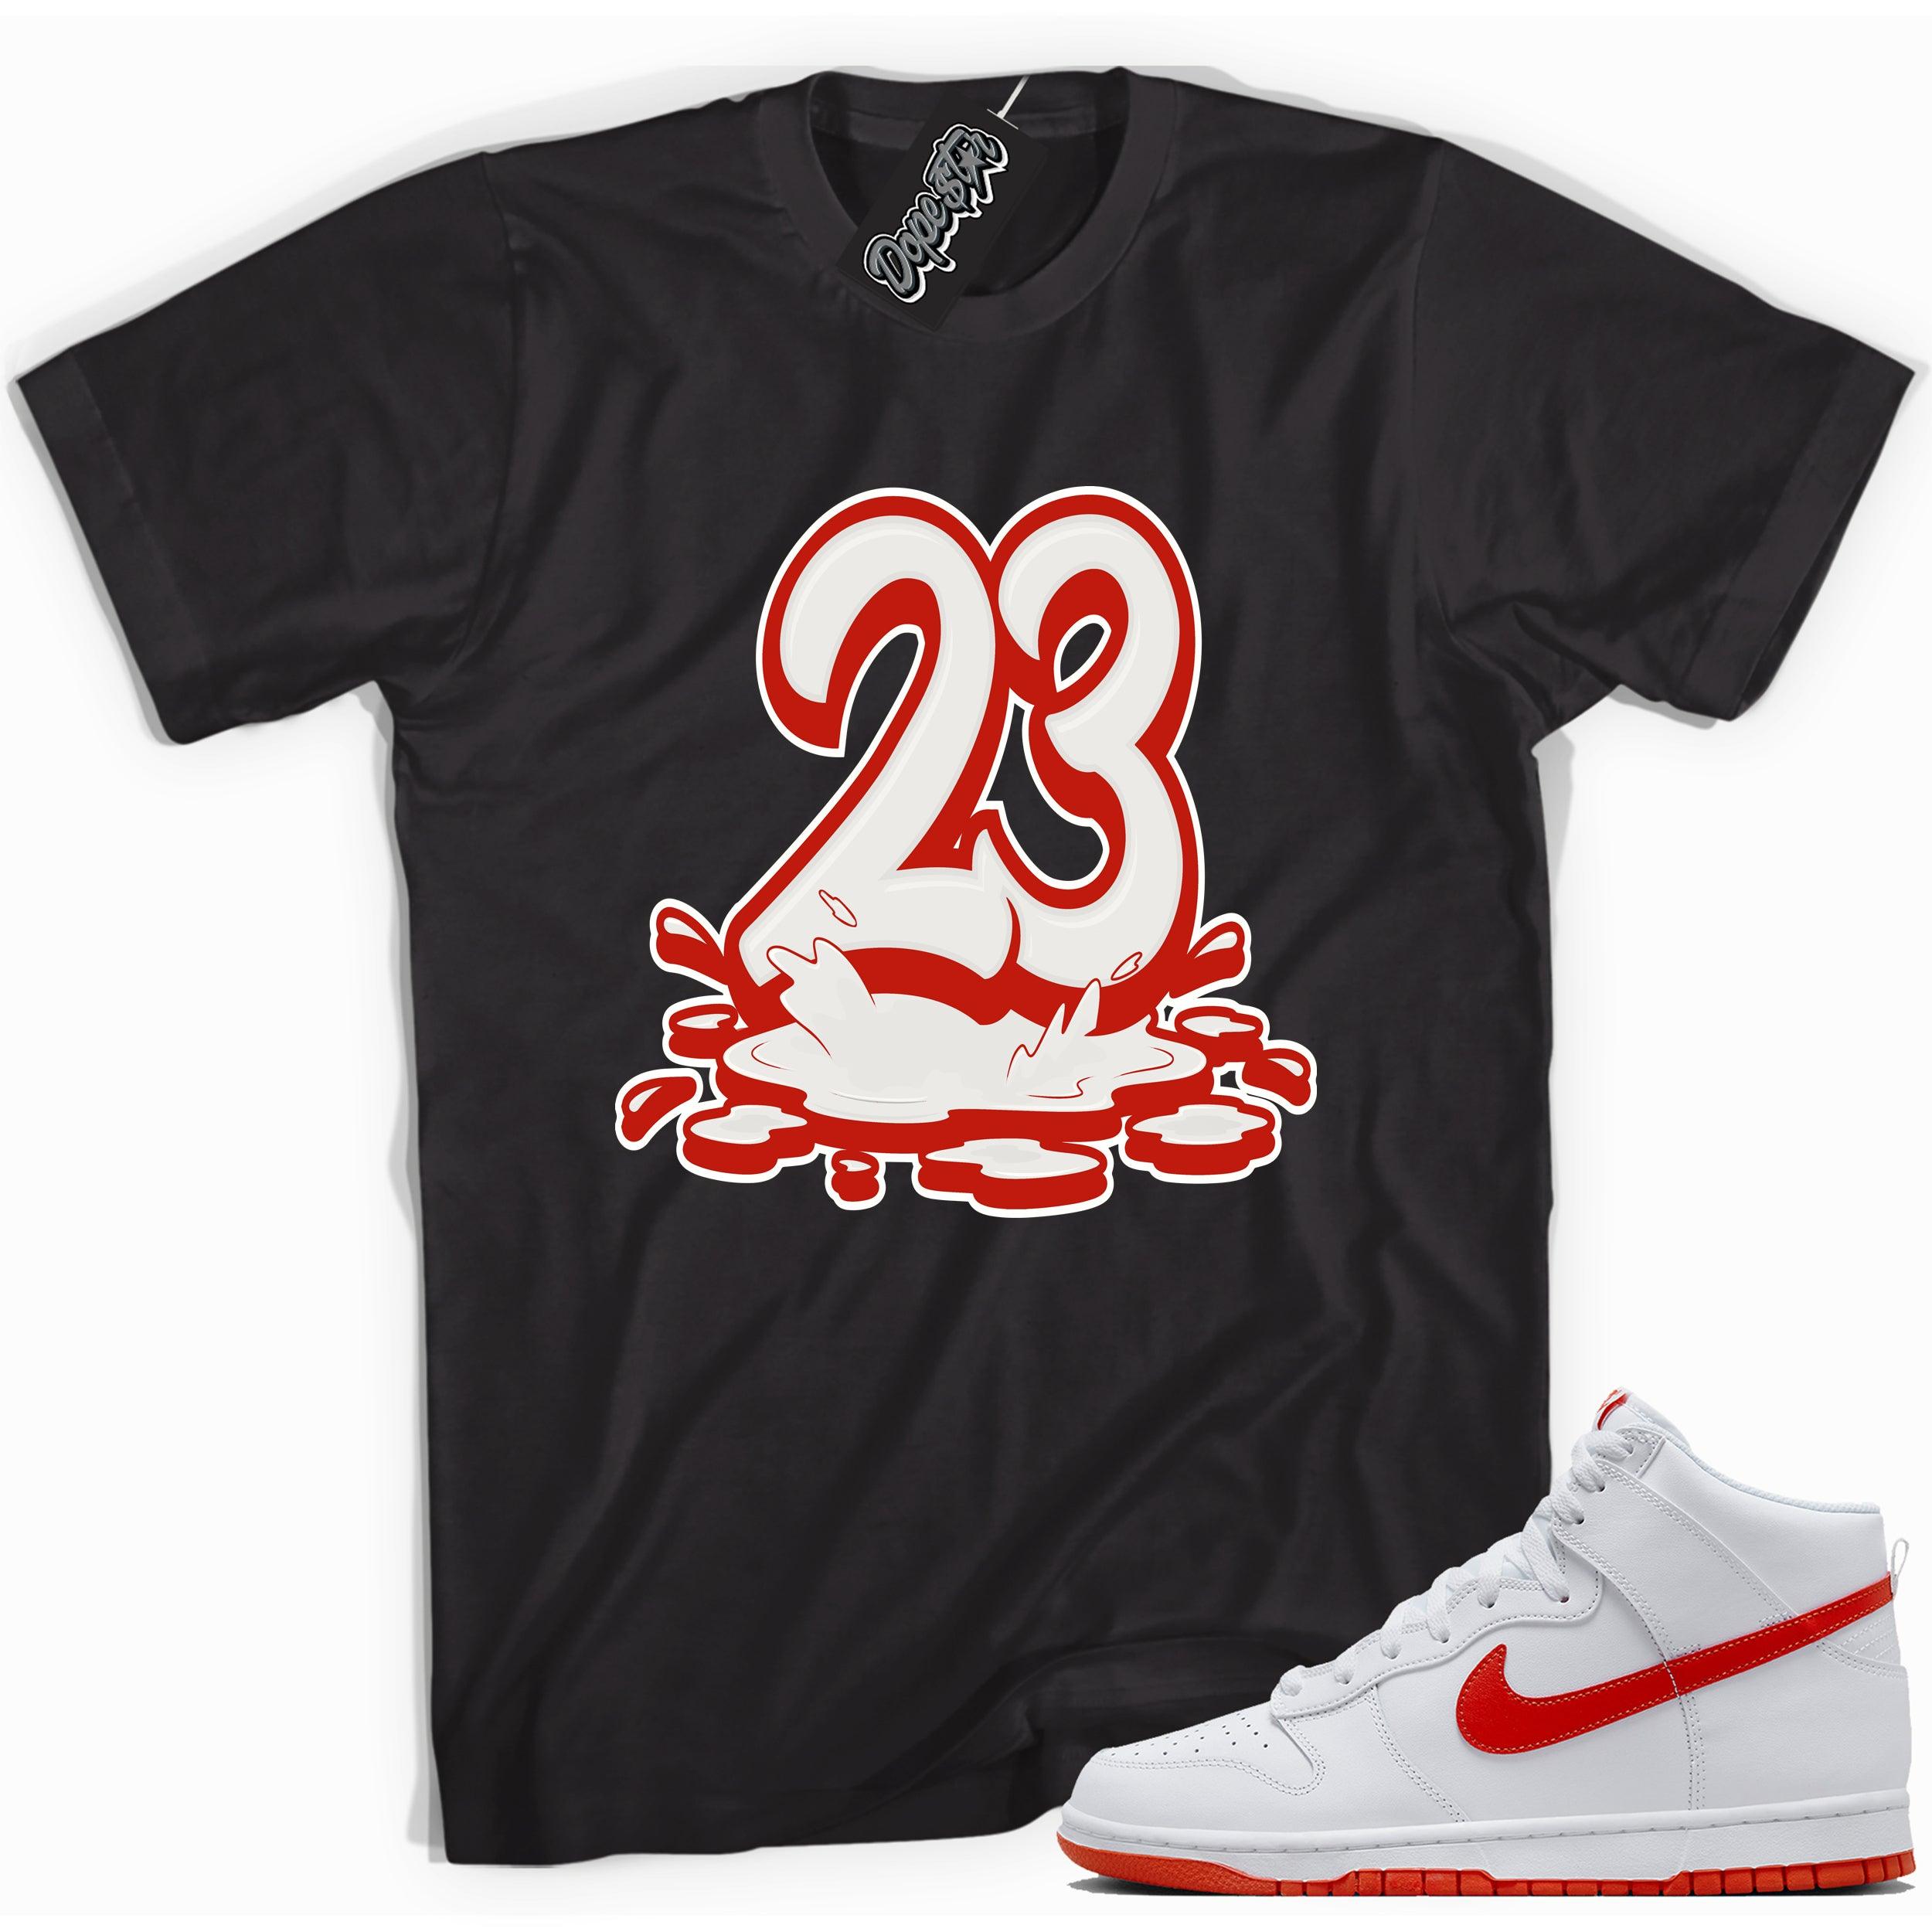 Cool black graphic tee with '23 melting' print, that perfectly matches Nike Dunk High White Picante Red sneakers.